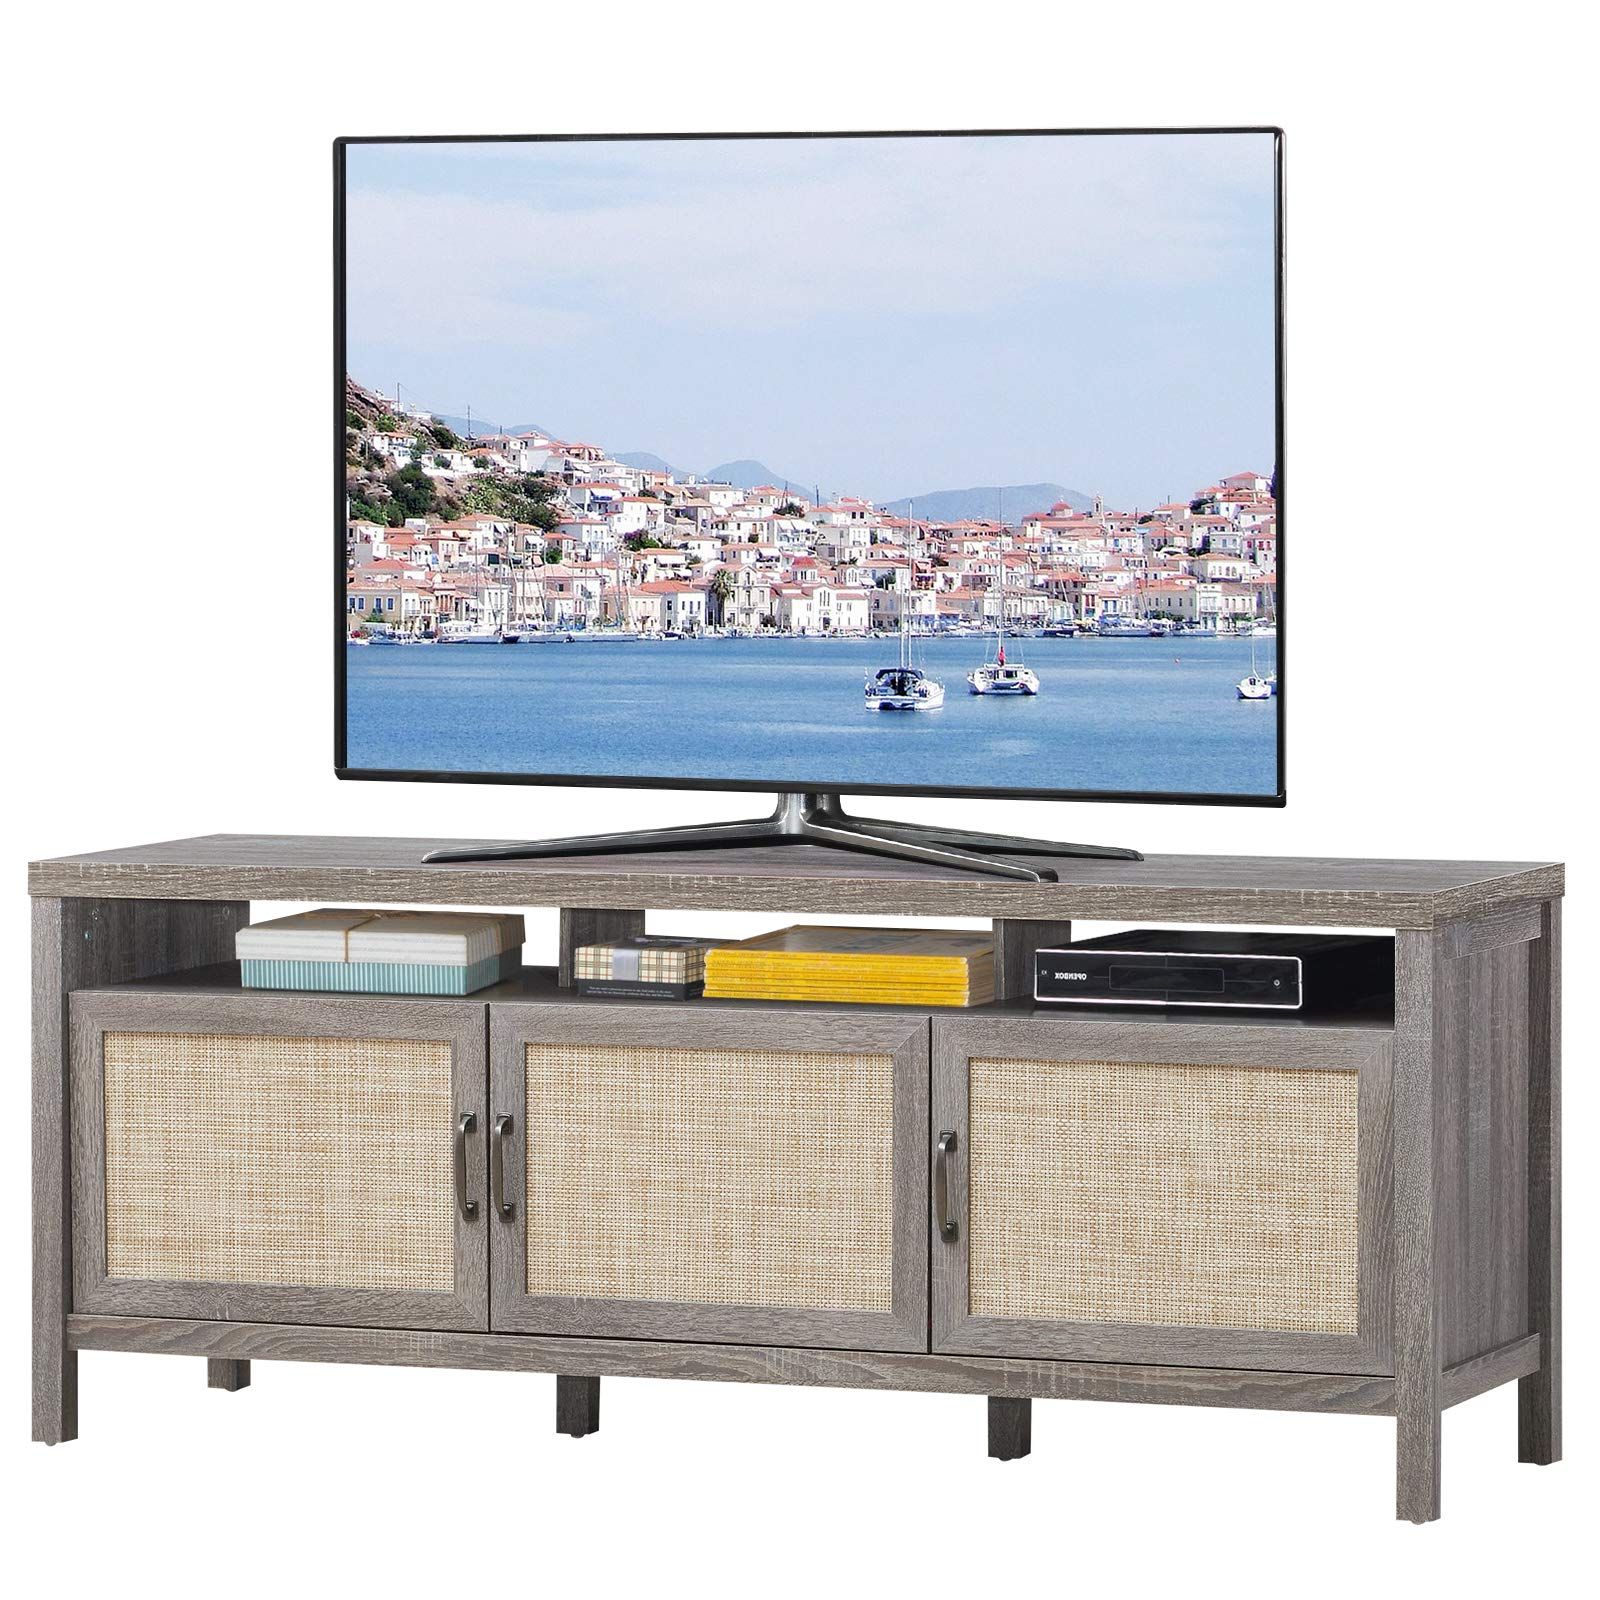 Buy Tangkula Farmhouse Rattan Tv Stand, 62 Inches Modern Boho Regarding 2019 Farmhouse Rattan Tv Stands (Photo 3 of 15)